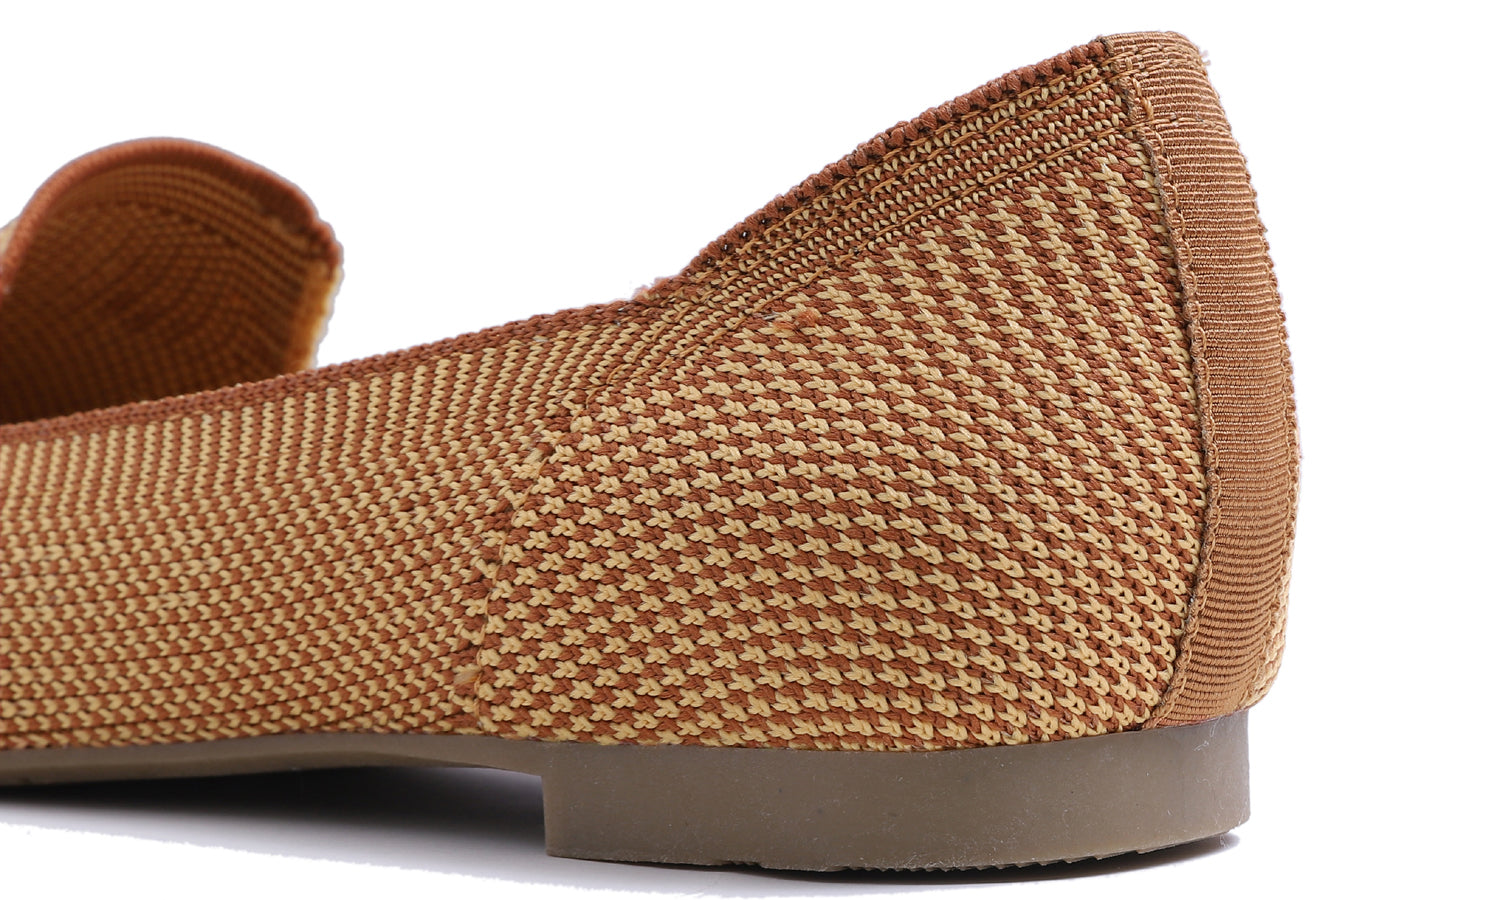 Feversole Women's Woven Fashion Breathable Knit Flat Shoes Tan Mixed Loafer